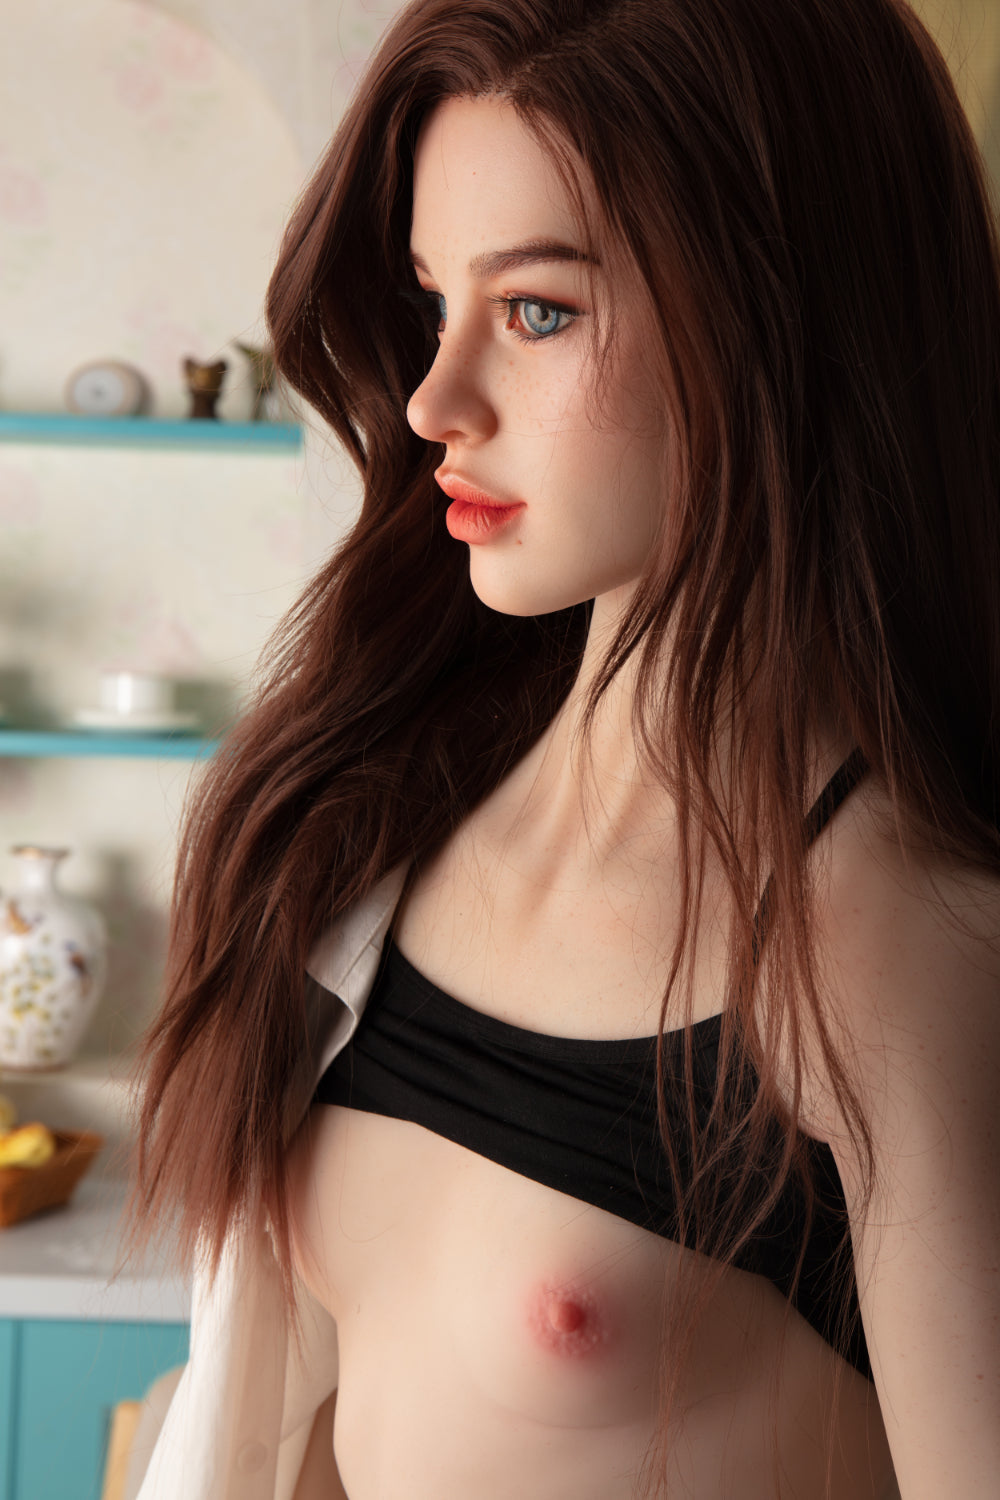 Starpery 171 cm A - Hedy | Buy Sex Dolls at DOLLS ACTUALLY